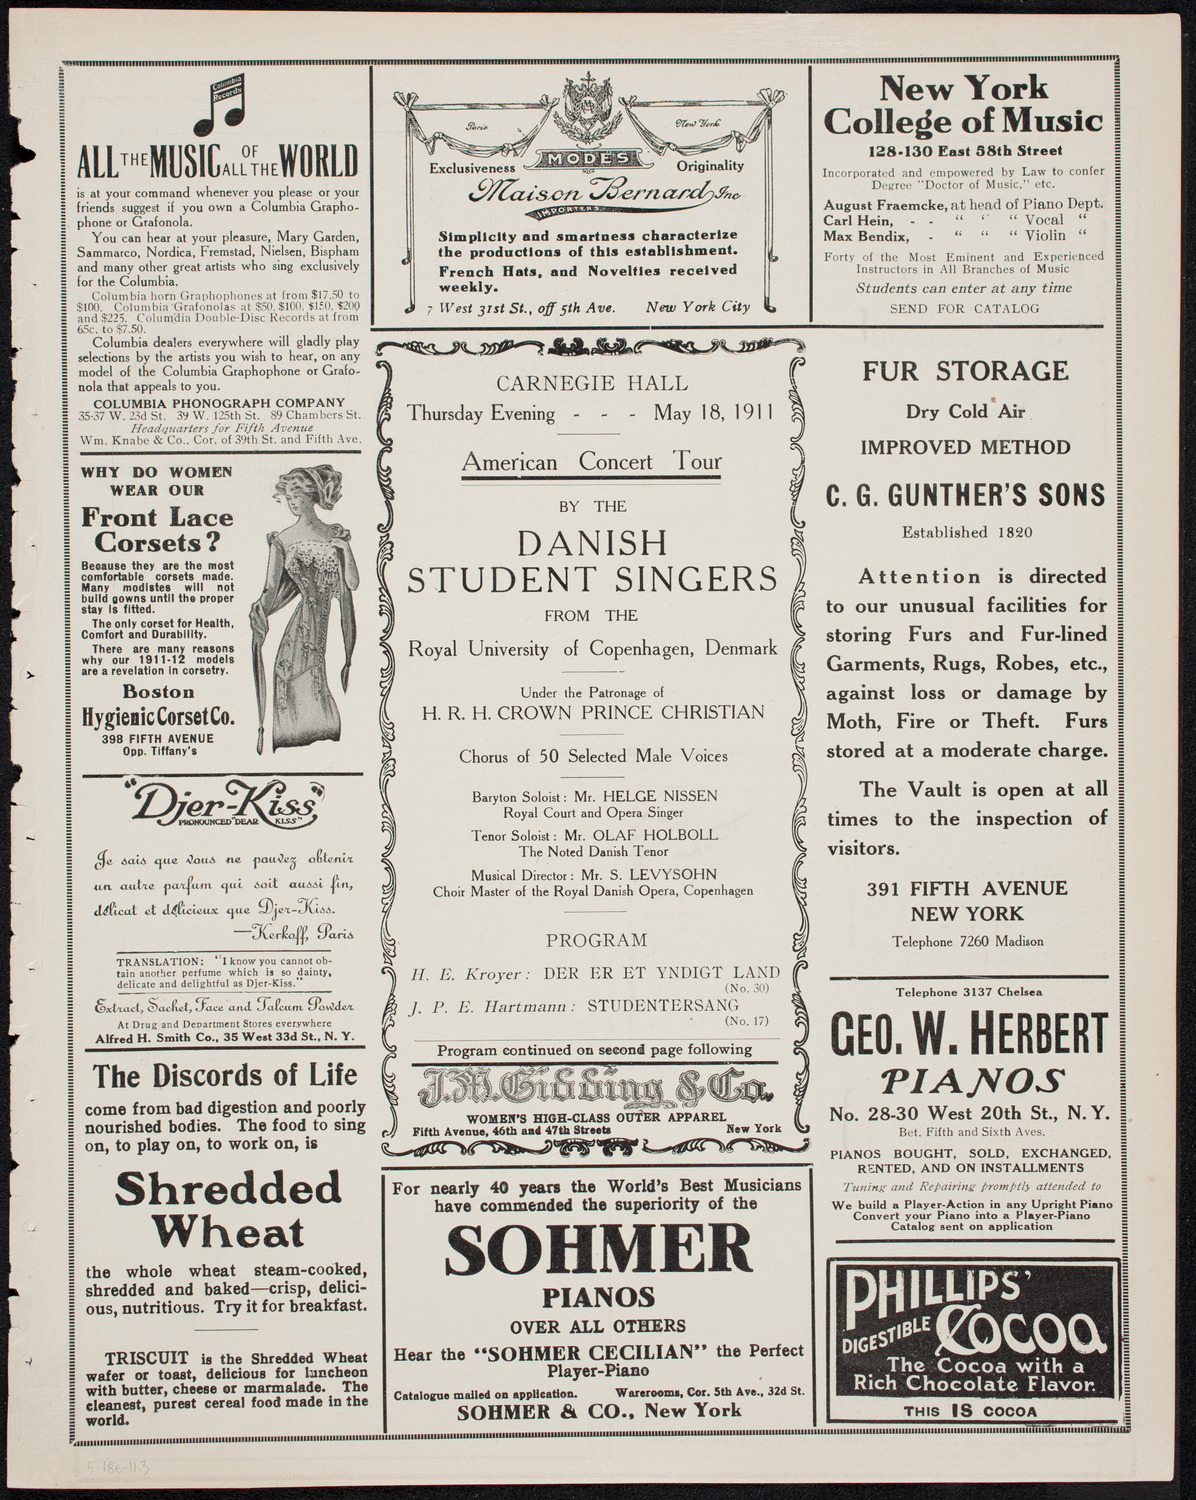 Danish Student Singers from the Royal University of Copenhagen, May 18, 1911, program page 5